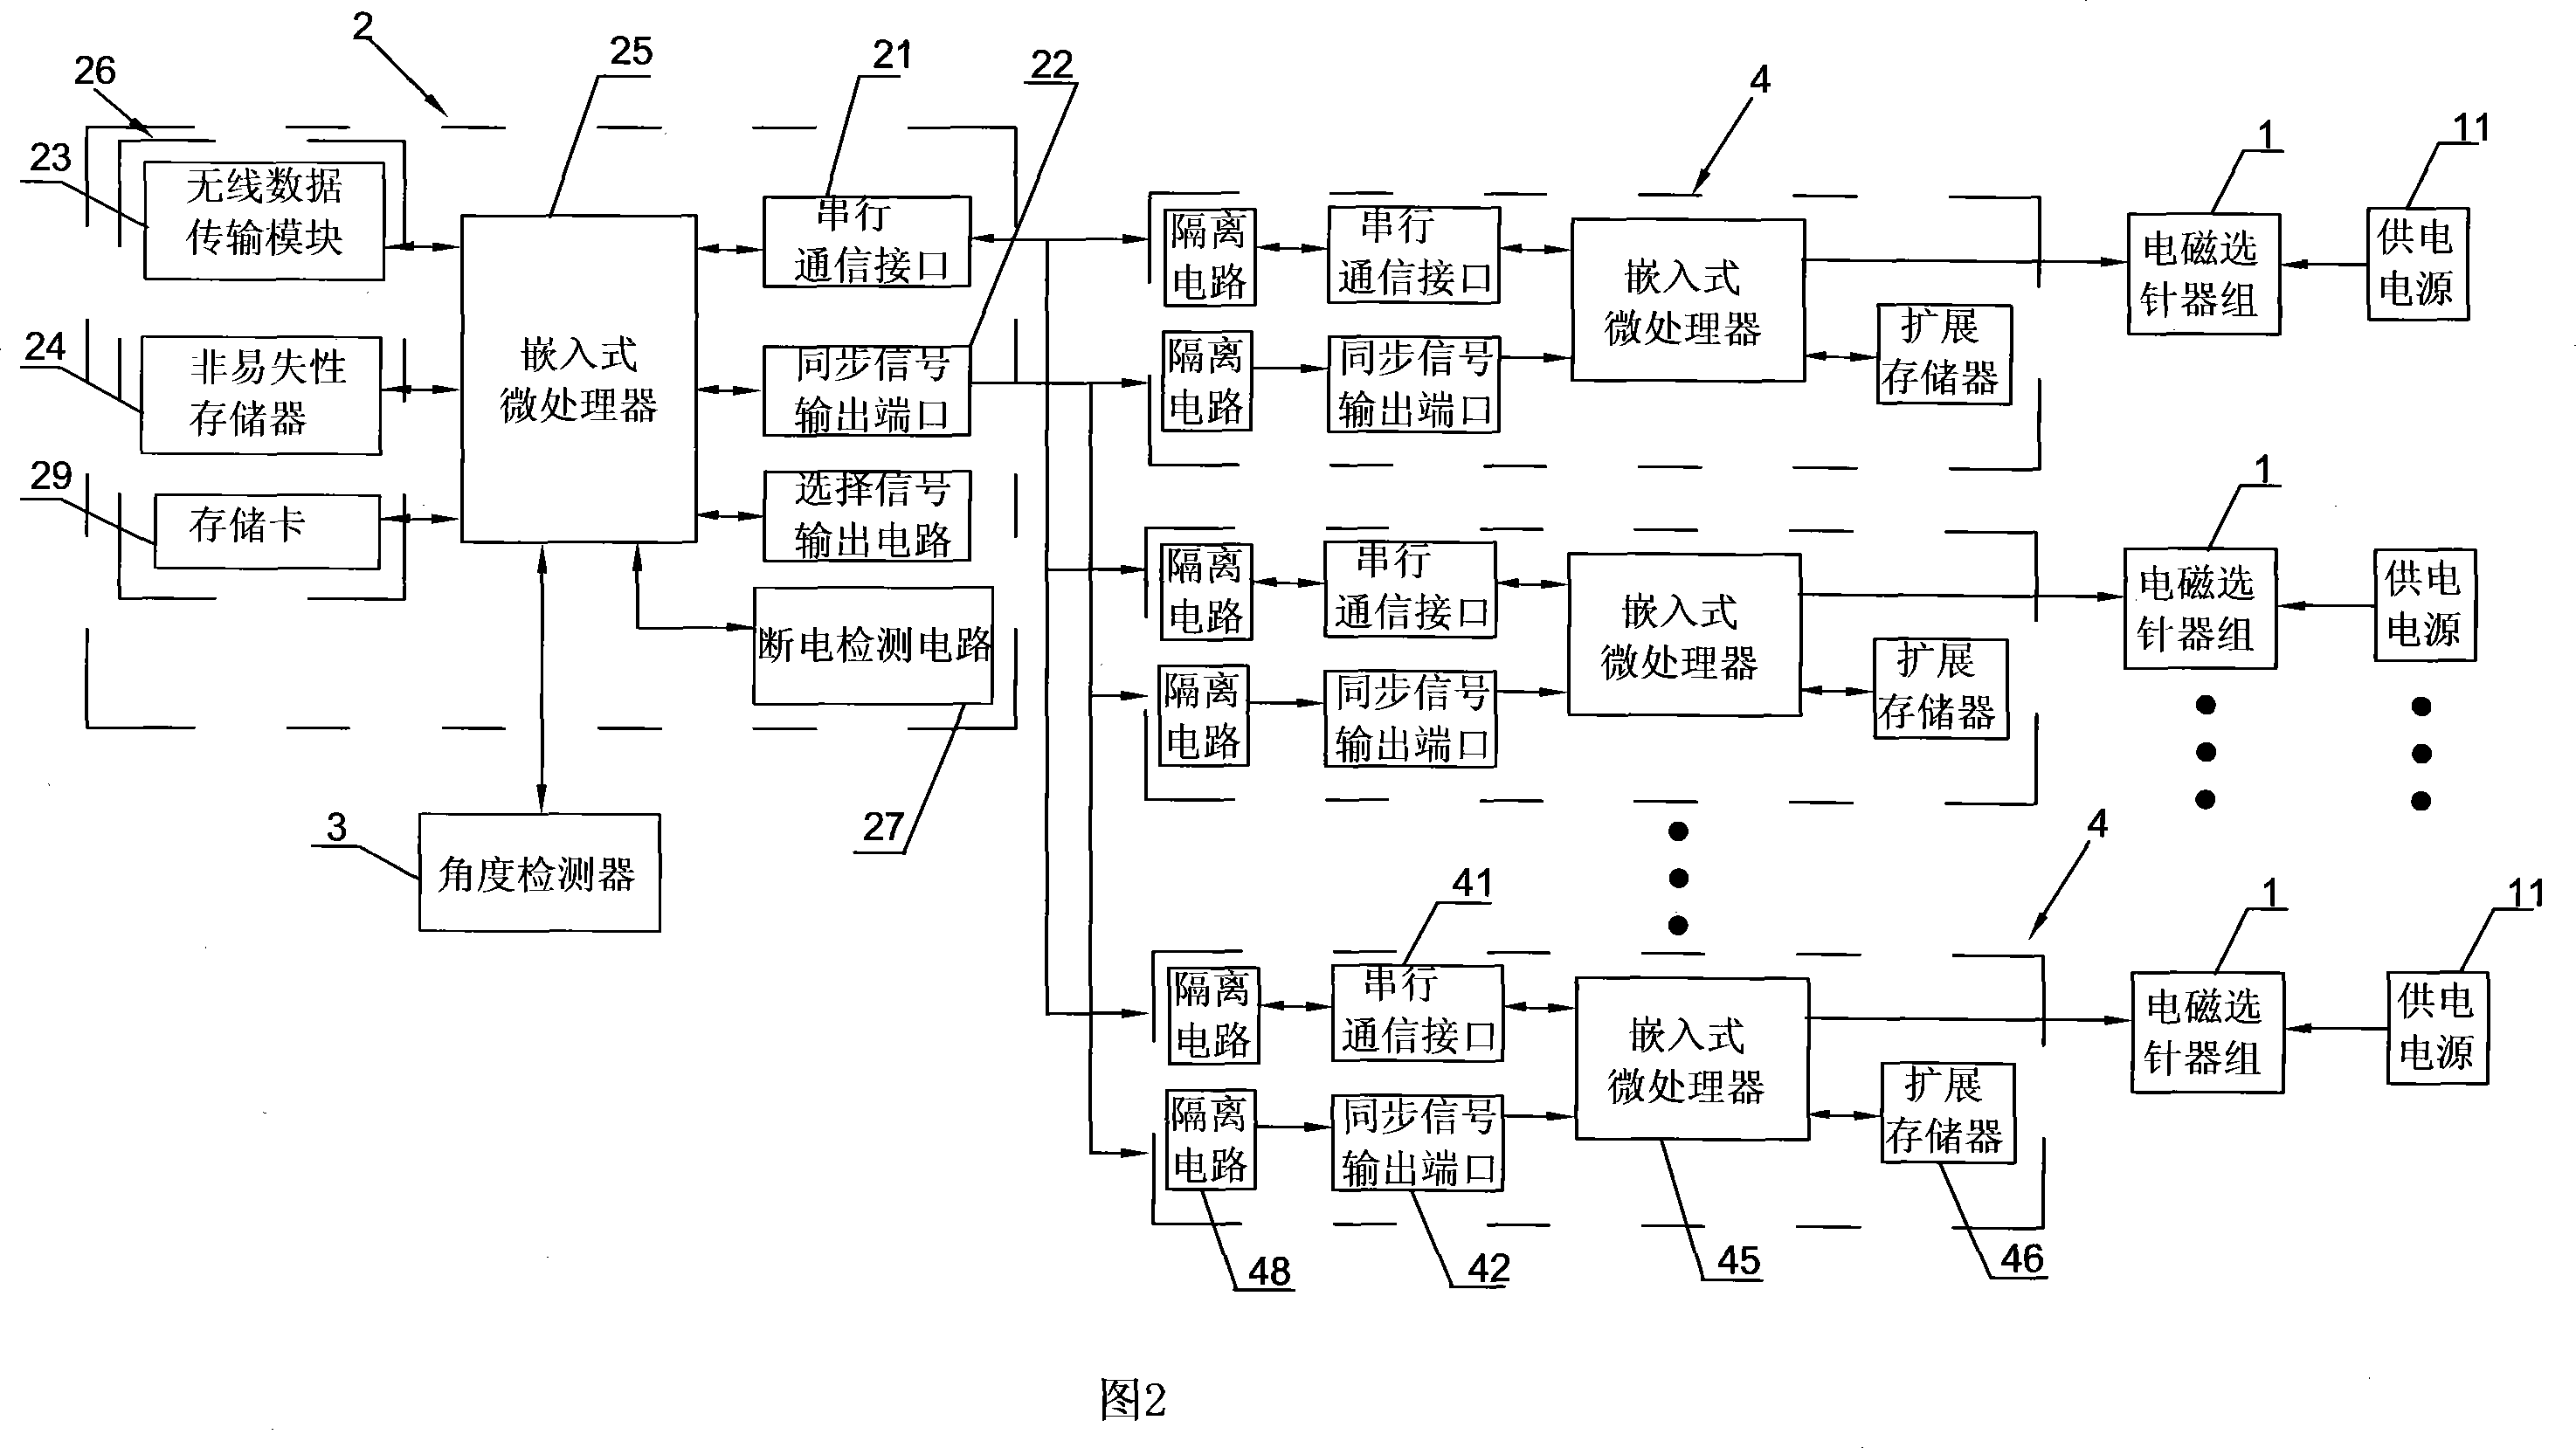 Control system for electronic jacquard machine